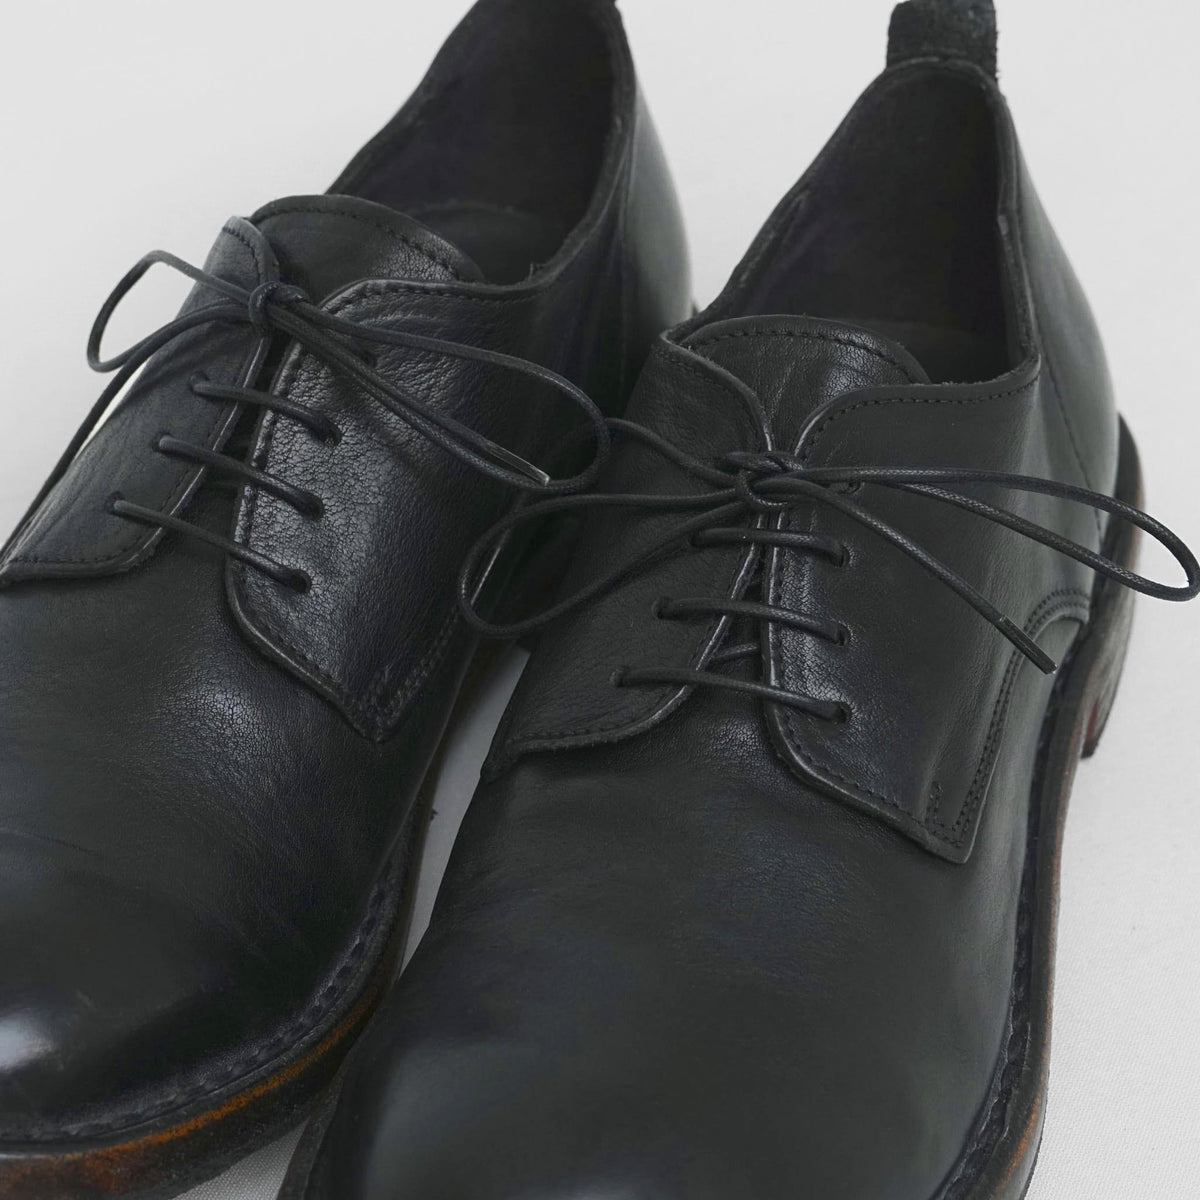 Moma Washed Leather Classic Blutcher Dress Shoes